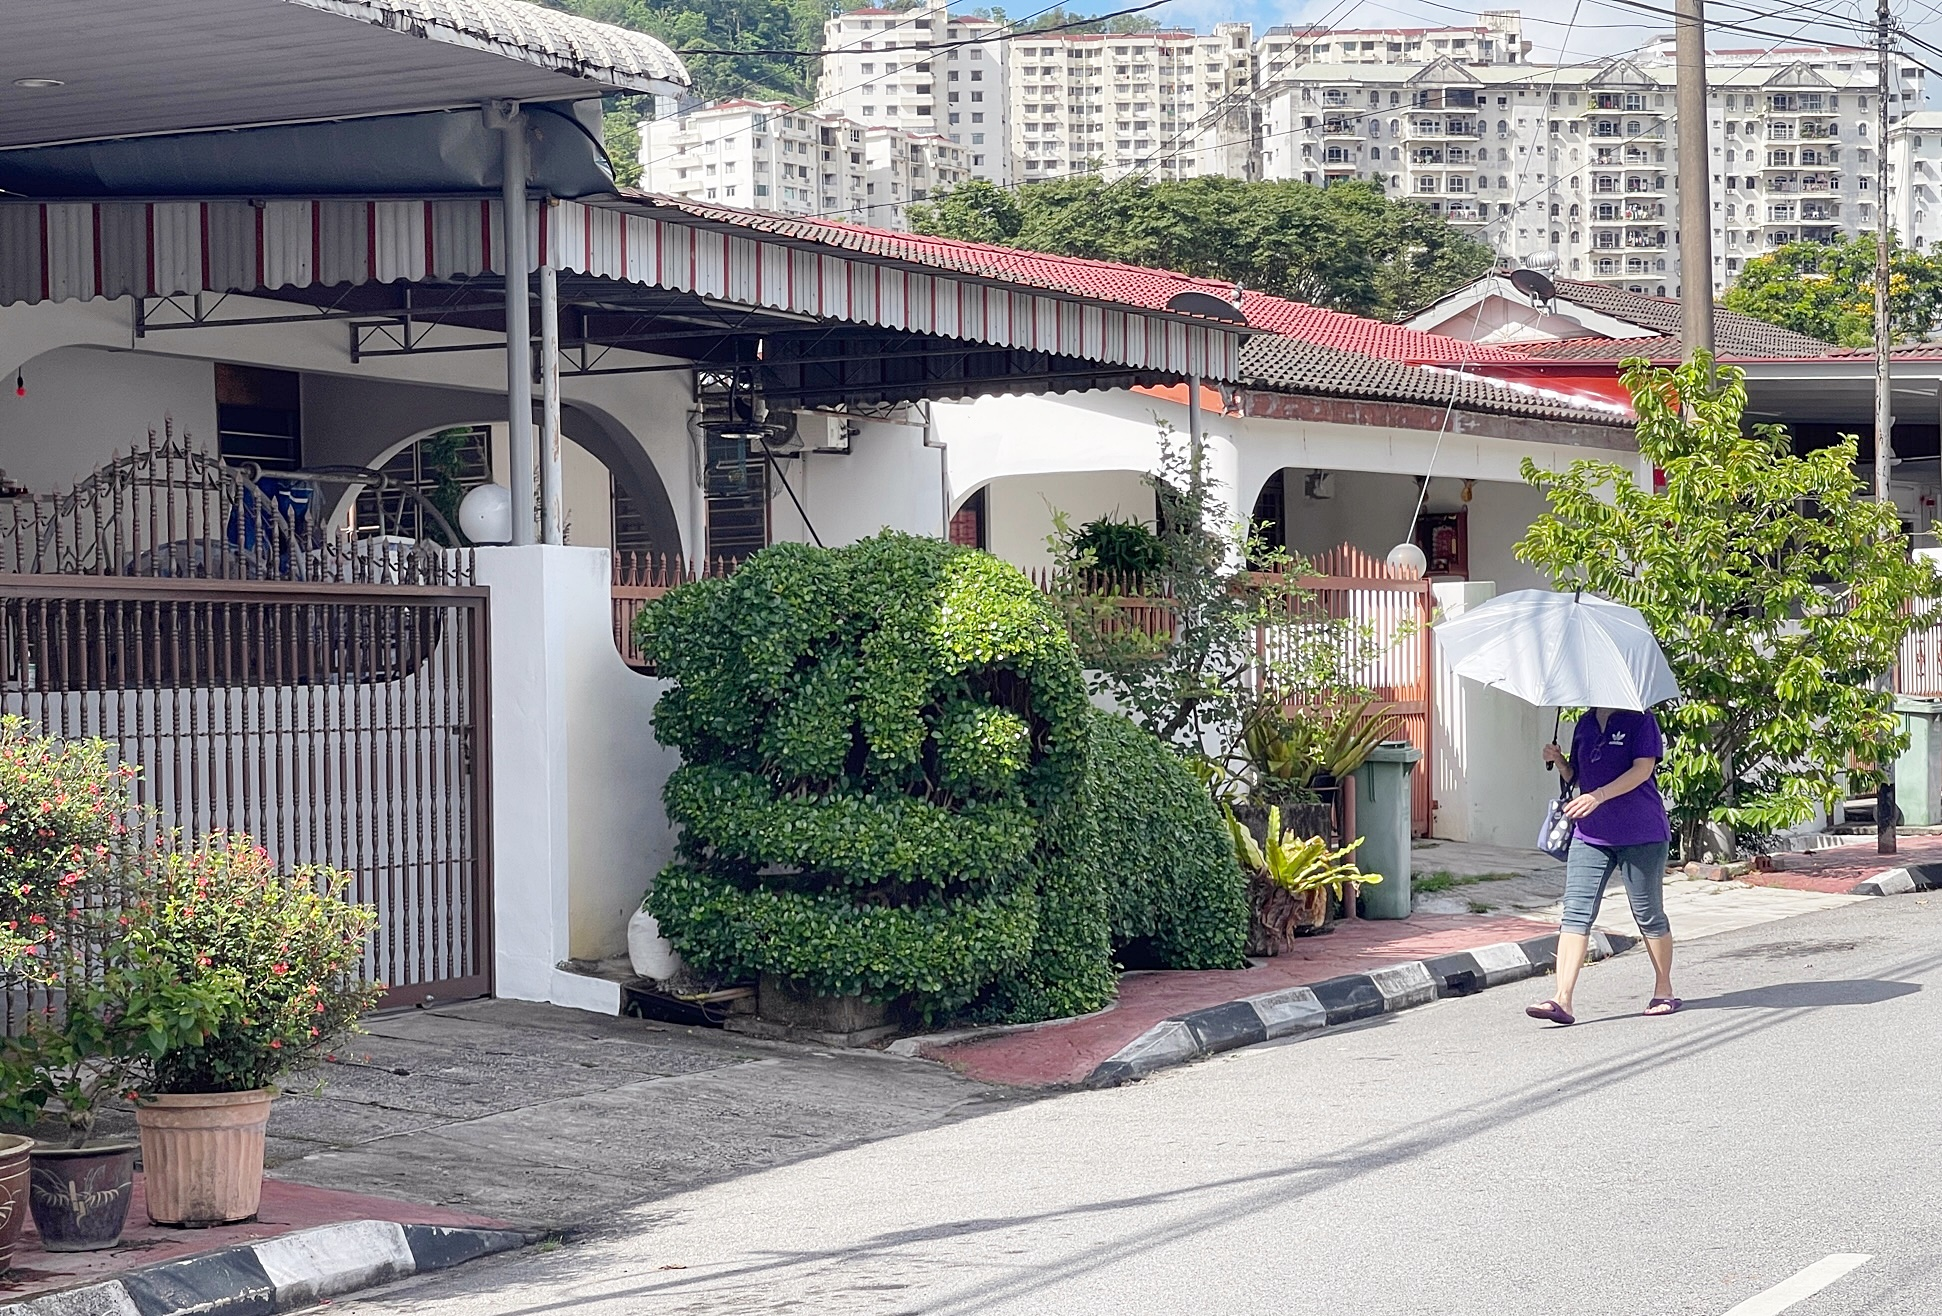 Penang man turns money tree into 'dancing lion' sculpture at residential area, wows m'sians